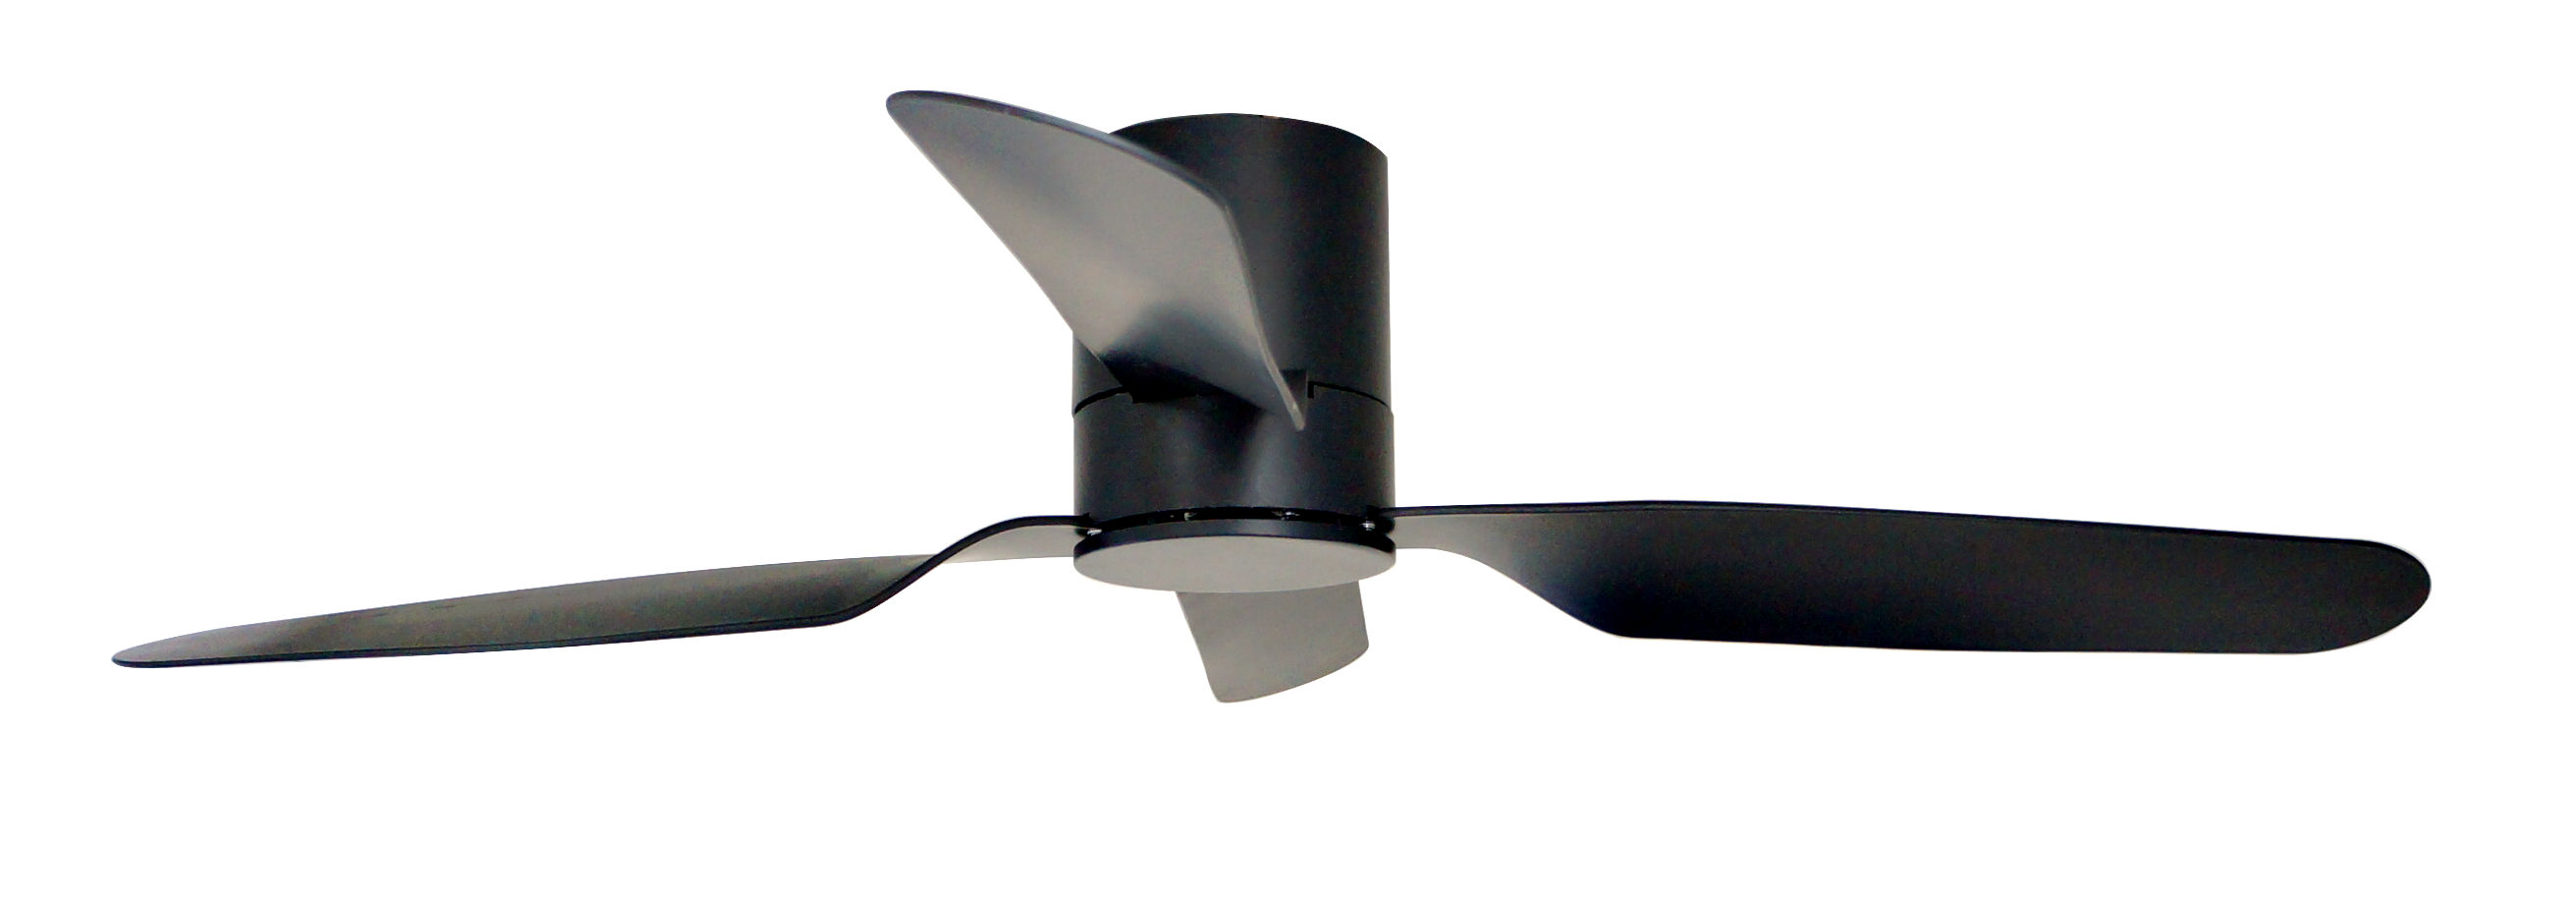 Airbena 42" ABS Ceiling Fan with Light: The Ideal Choice for Modern Homes